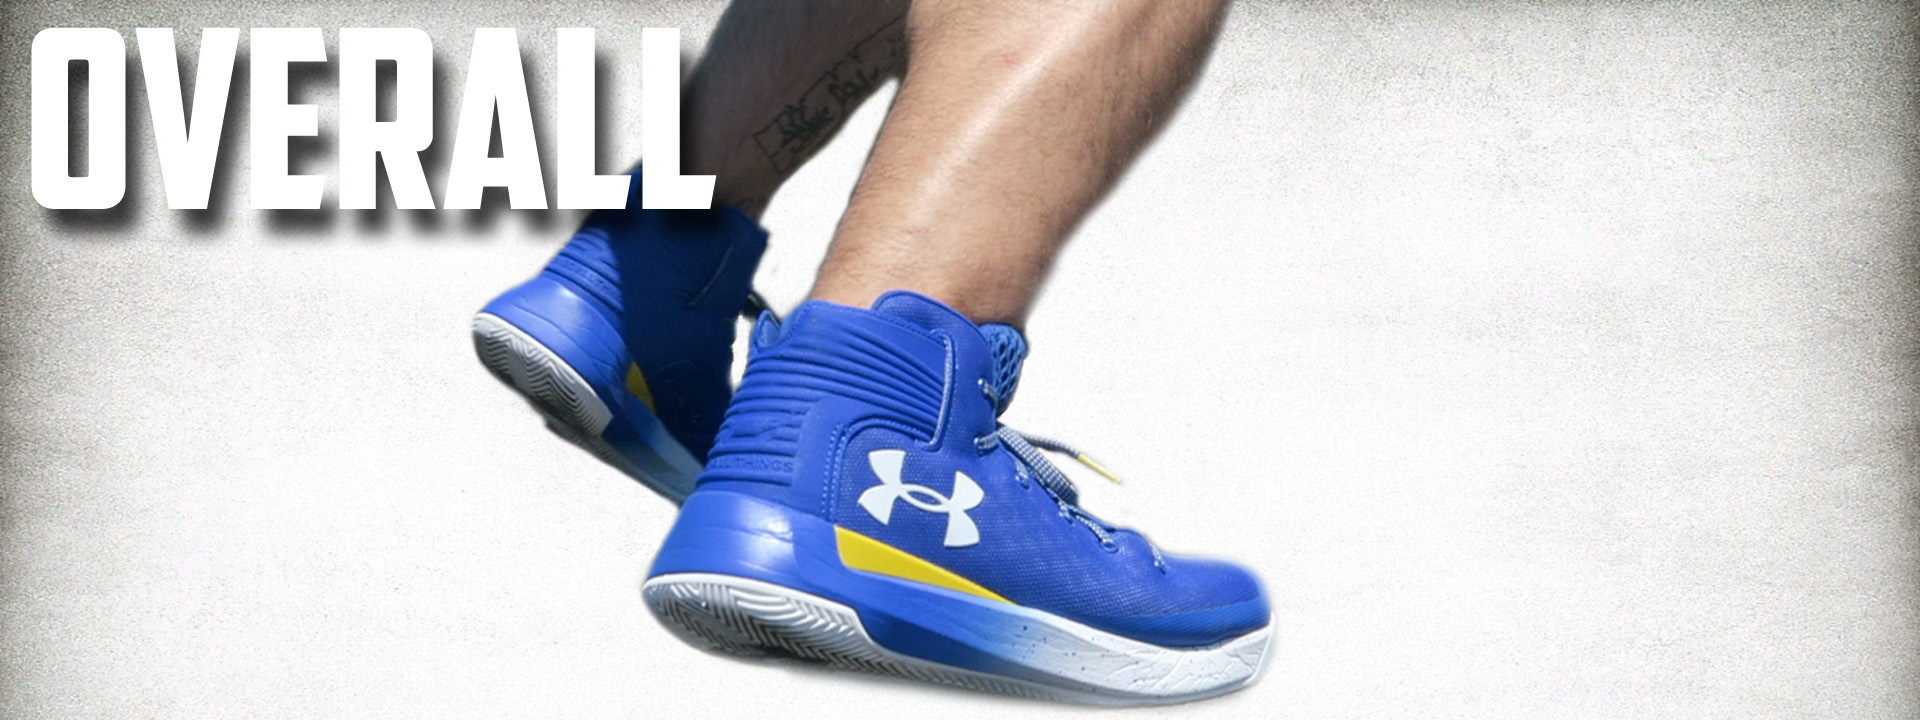 Under Armour Curry 3 ZER0 performance review overall